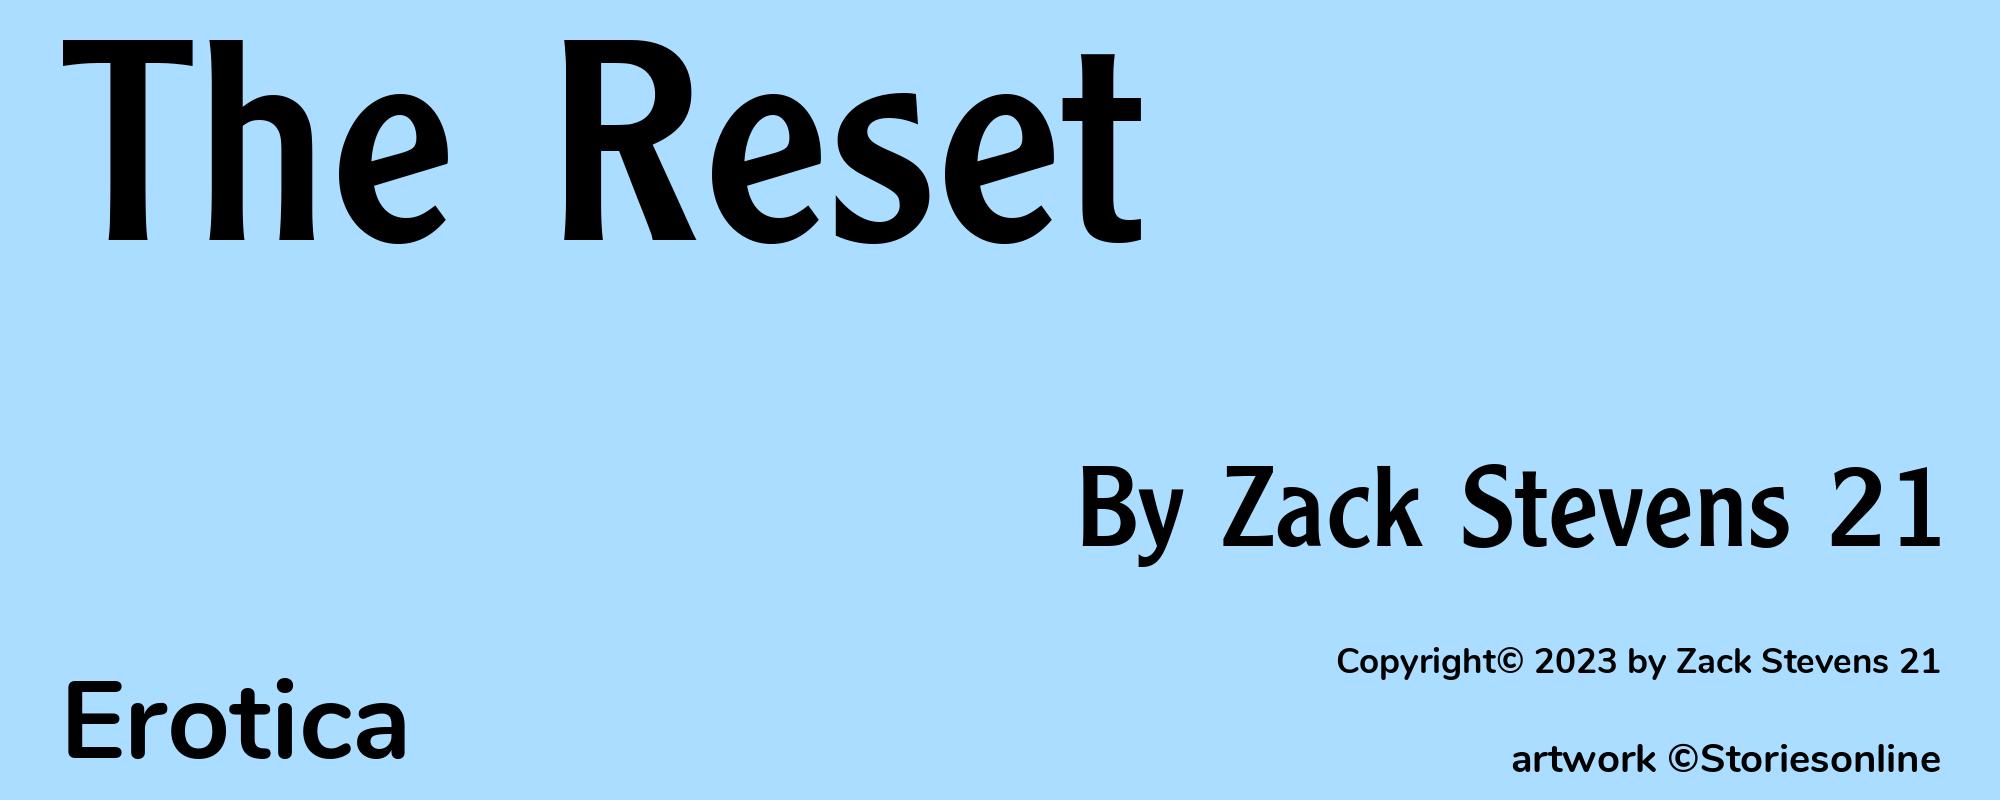 The Reset - Cover